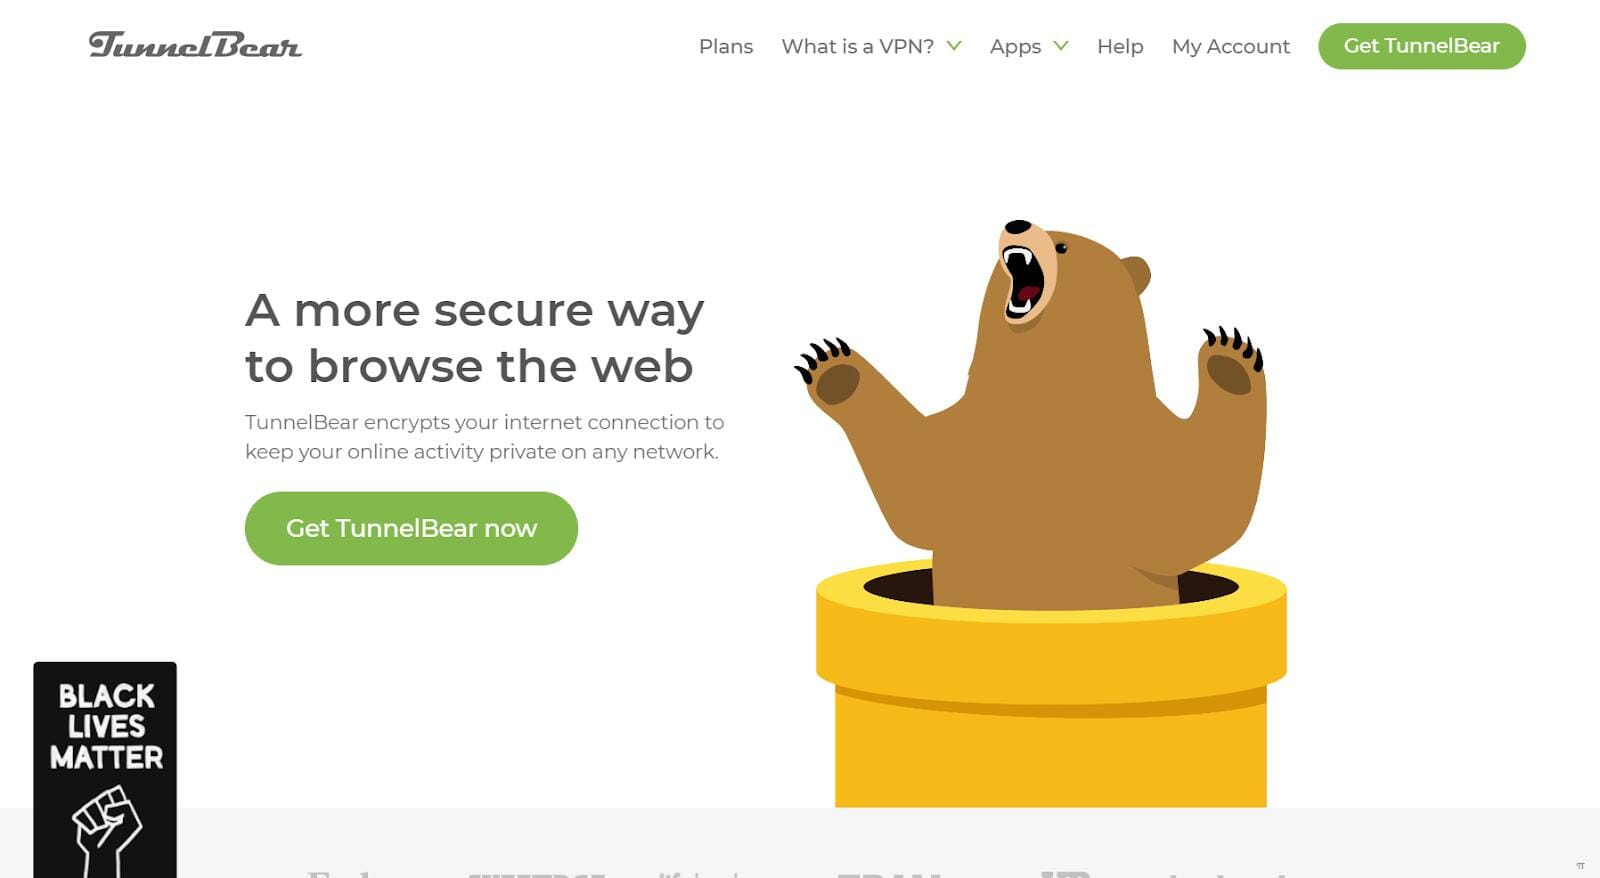 Free VPN for digital rights defenders: A partnership between TunnelBear and  EngageMedia - EngageMedia